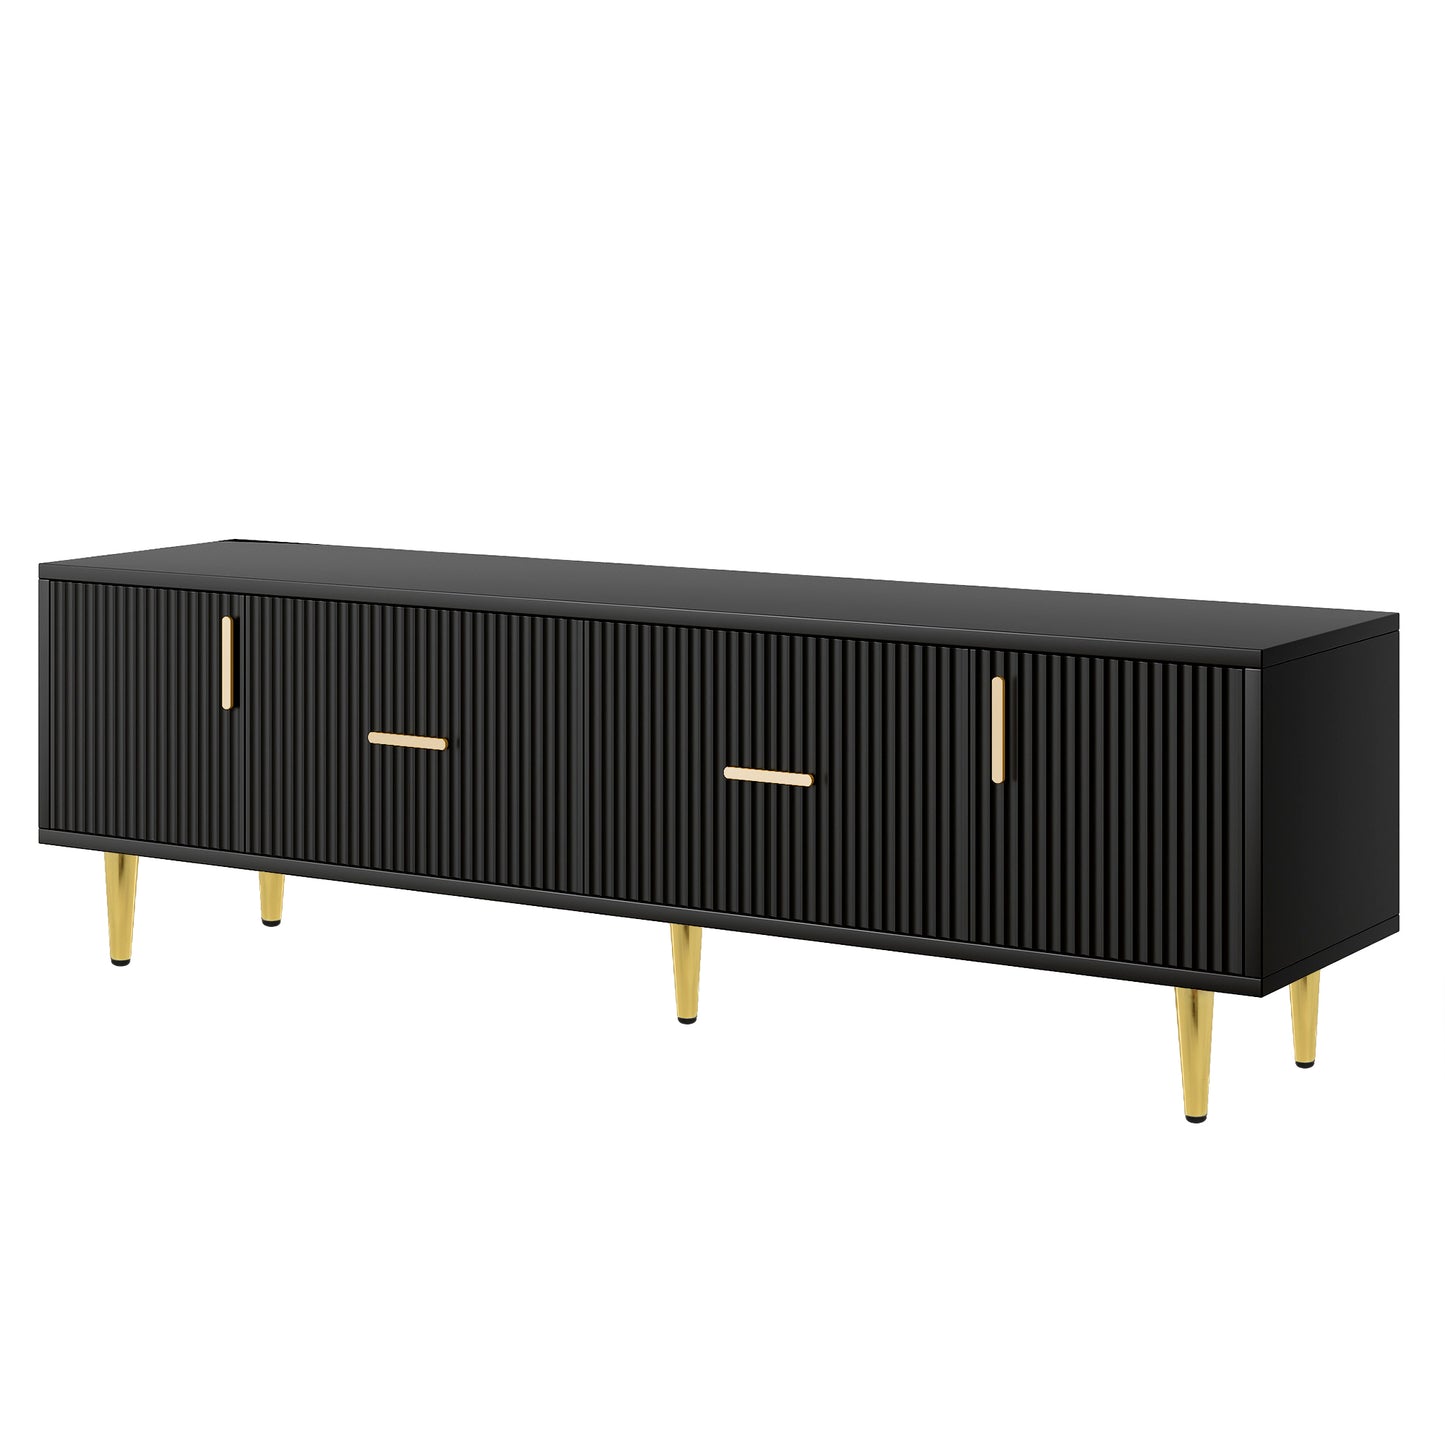 U-Can Modern TV Stand with 5 Champagne Legs - Durable, Stylish and Spacious, TVs Up to 75''